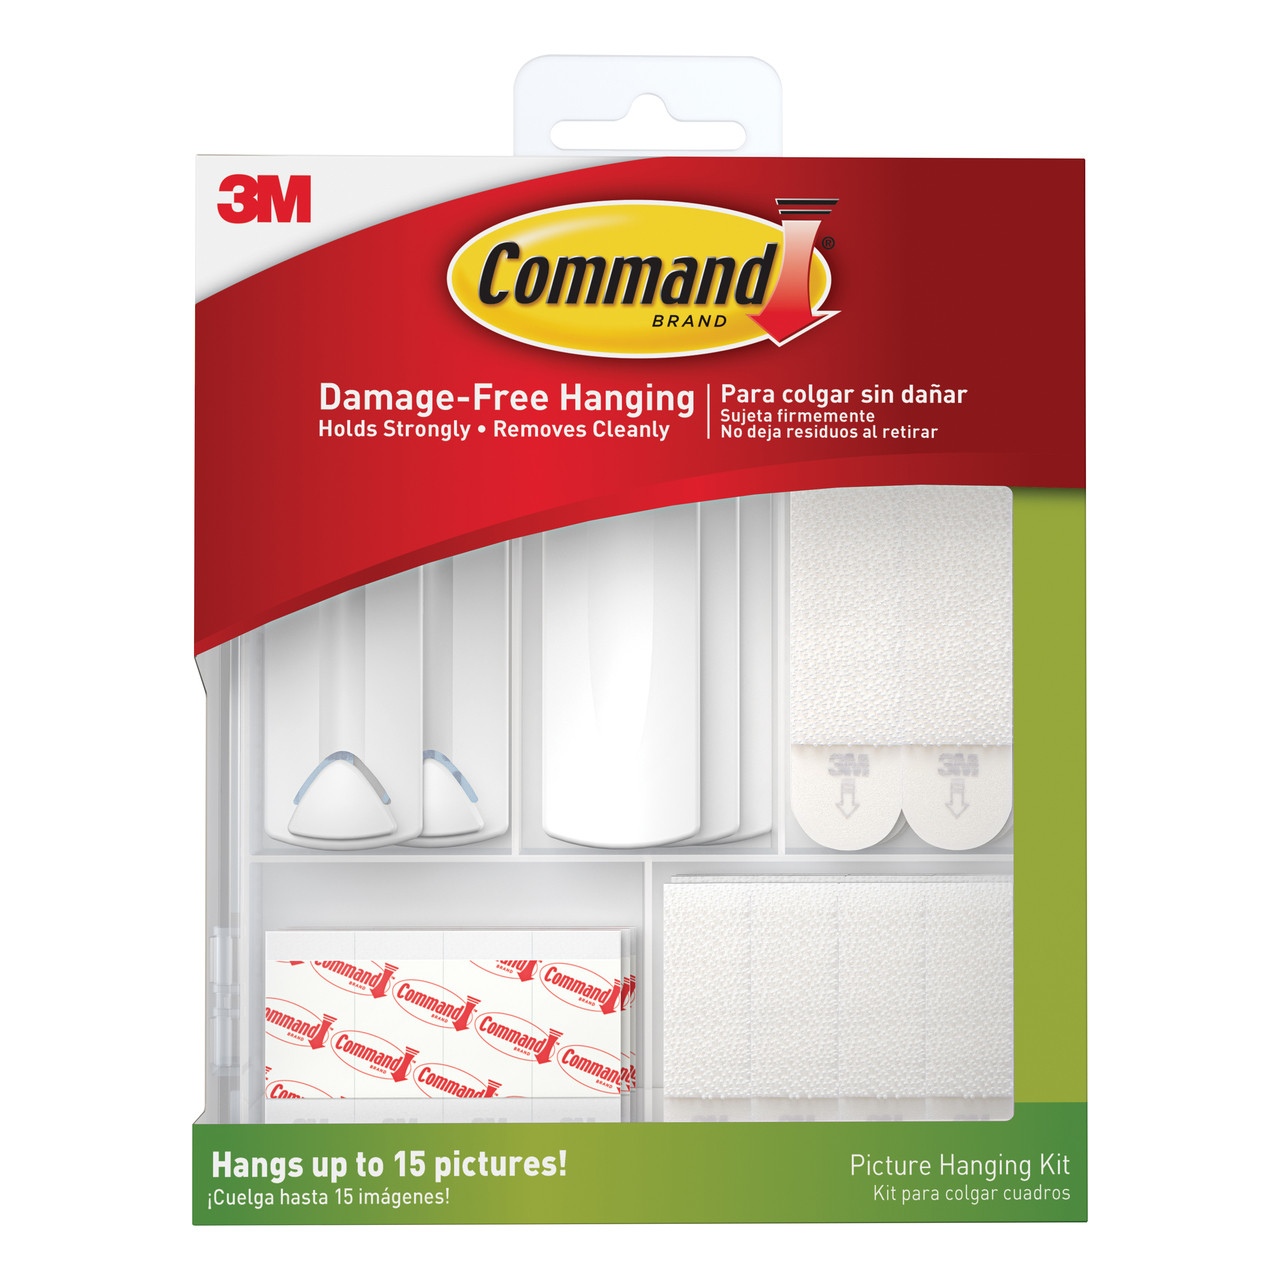 3M Scotch Command Damage-Free Picture Hanging Kit - Meininger Art Supply